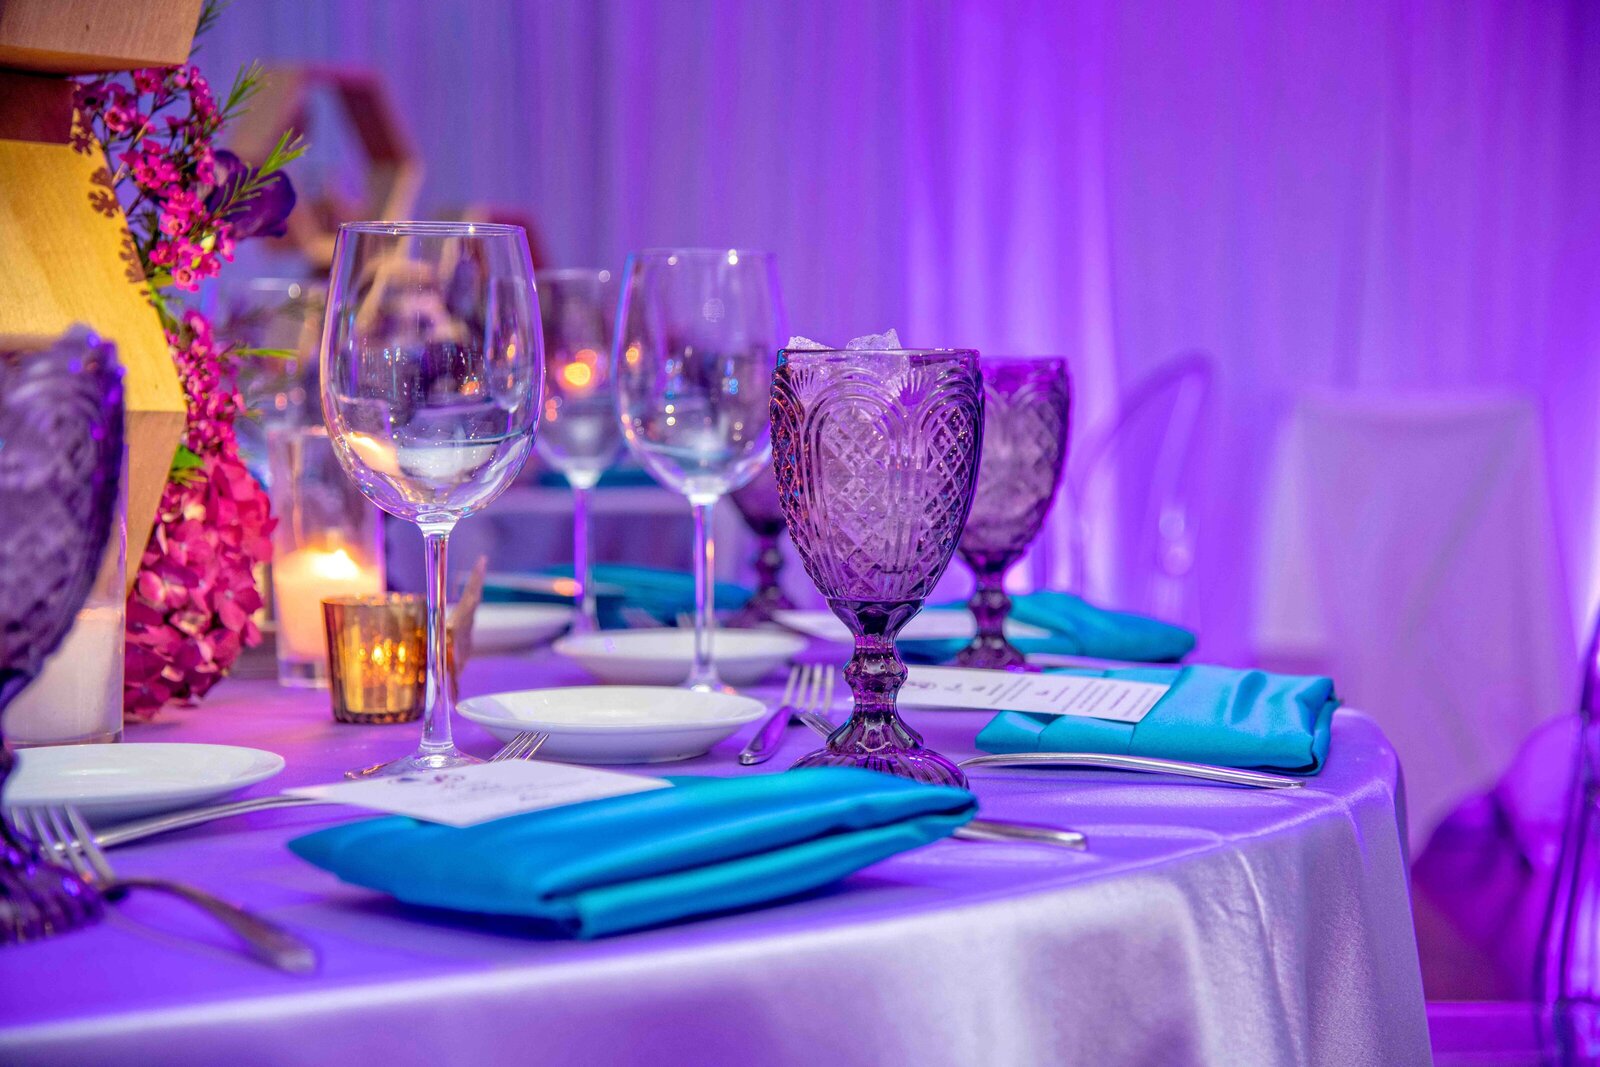 Maria-McCarthy-Photography-Mitzvah-table setting